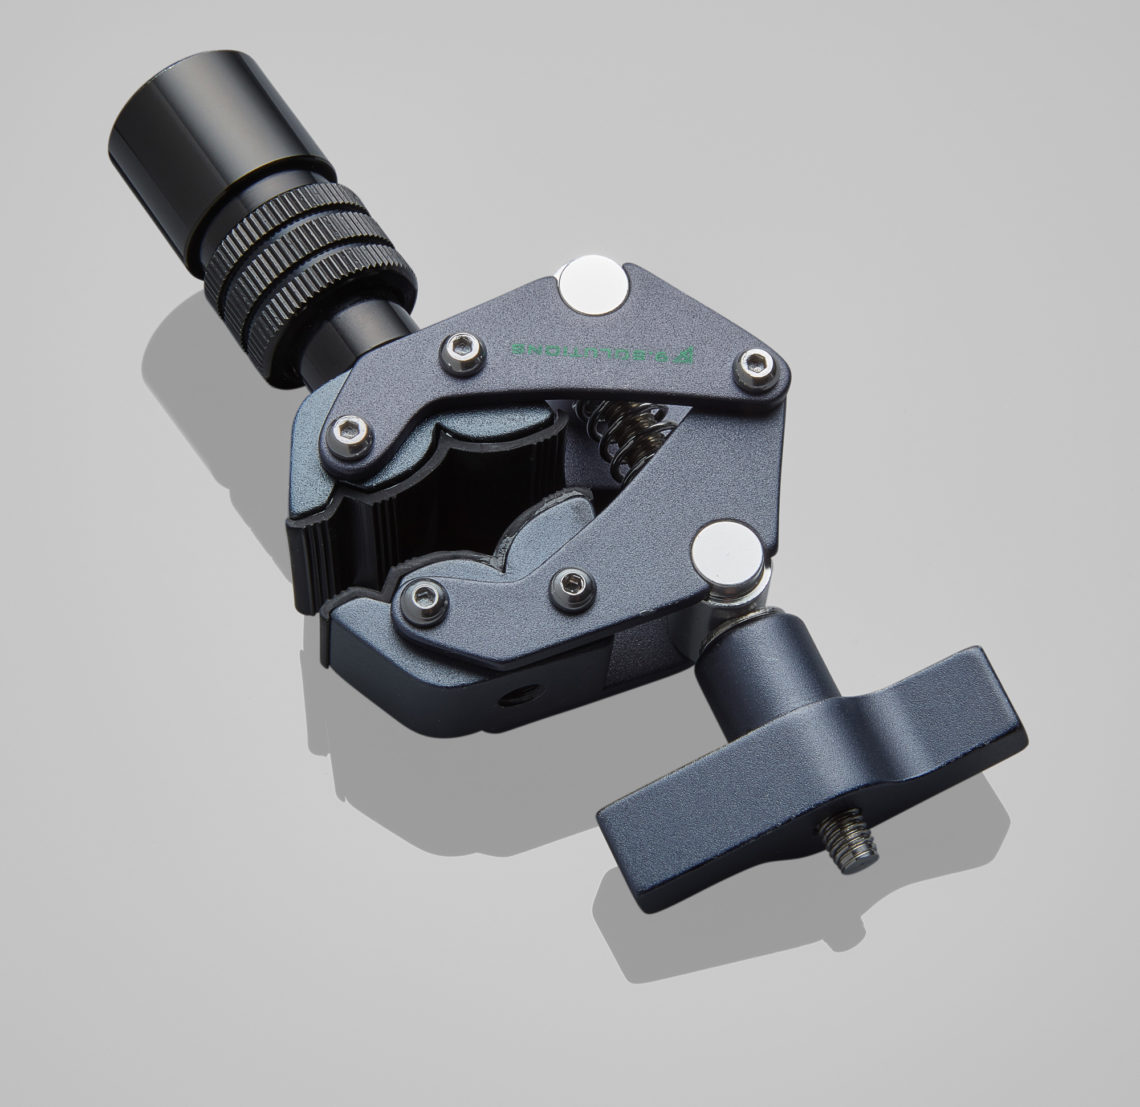 I/O-Equipped Mini Grip Clamp is Capable of exerting very strong clamping force, IO-GCM has jaws that open up to 1.18″ to hold gear weighing up to 66 lb.